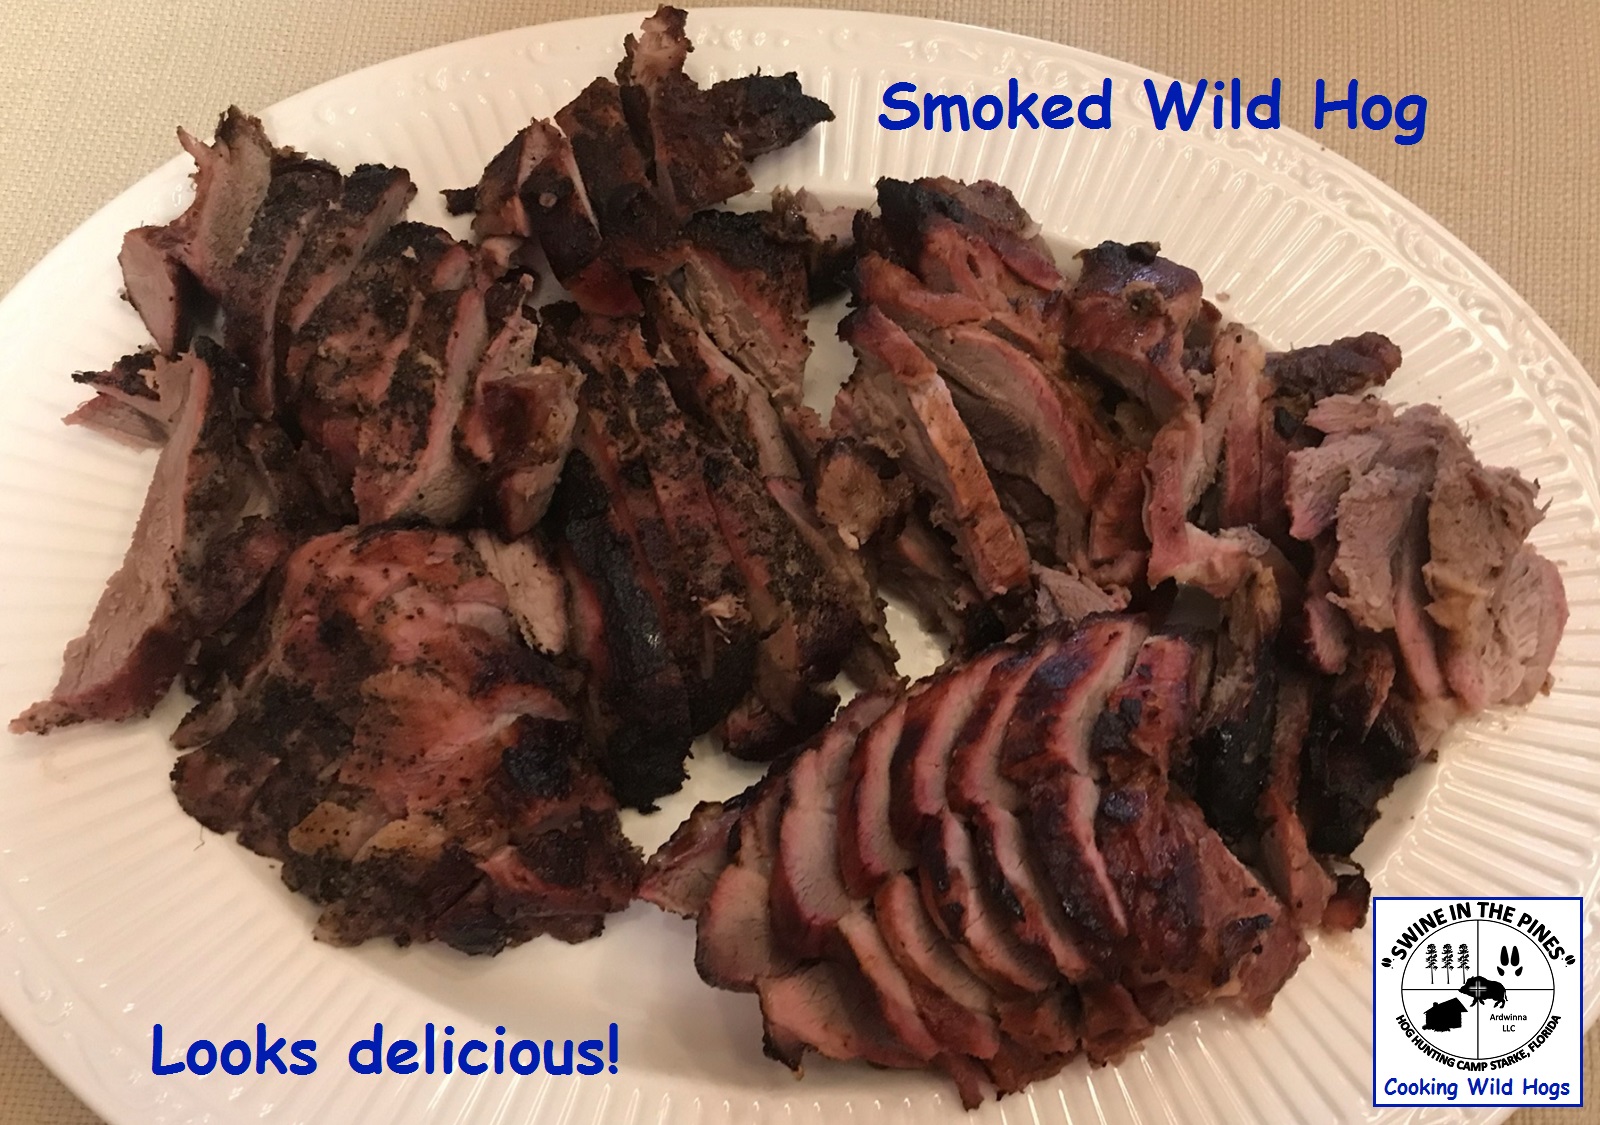 Smoked Wild Hog from Michael - Looks delicious!